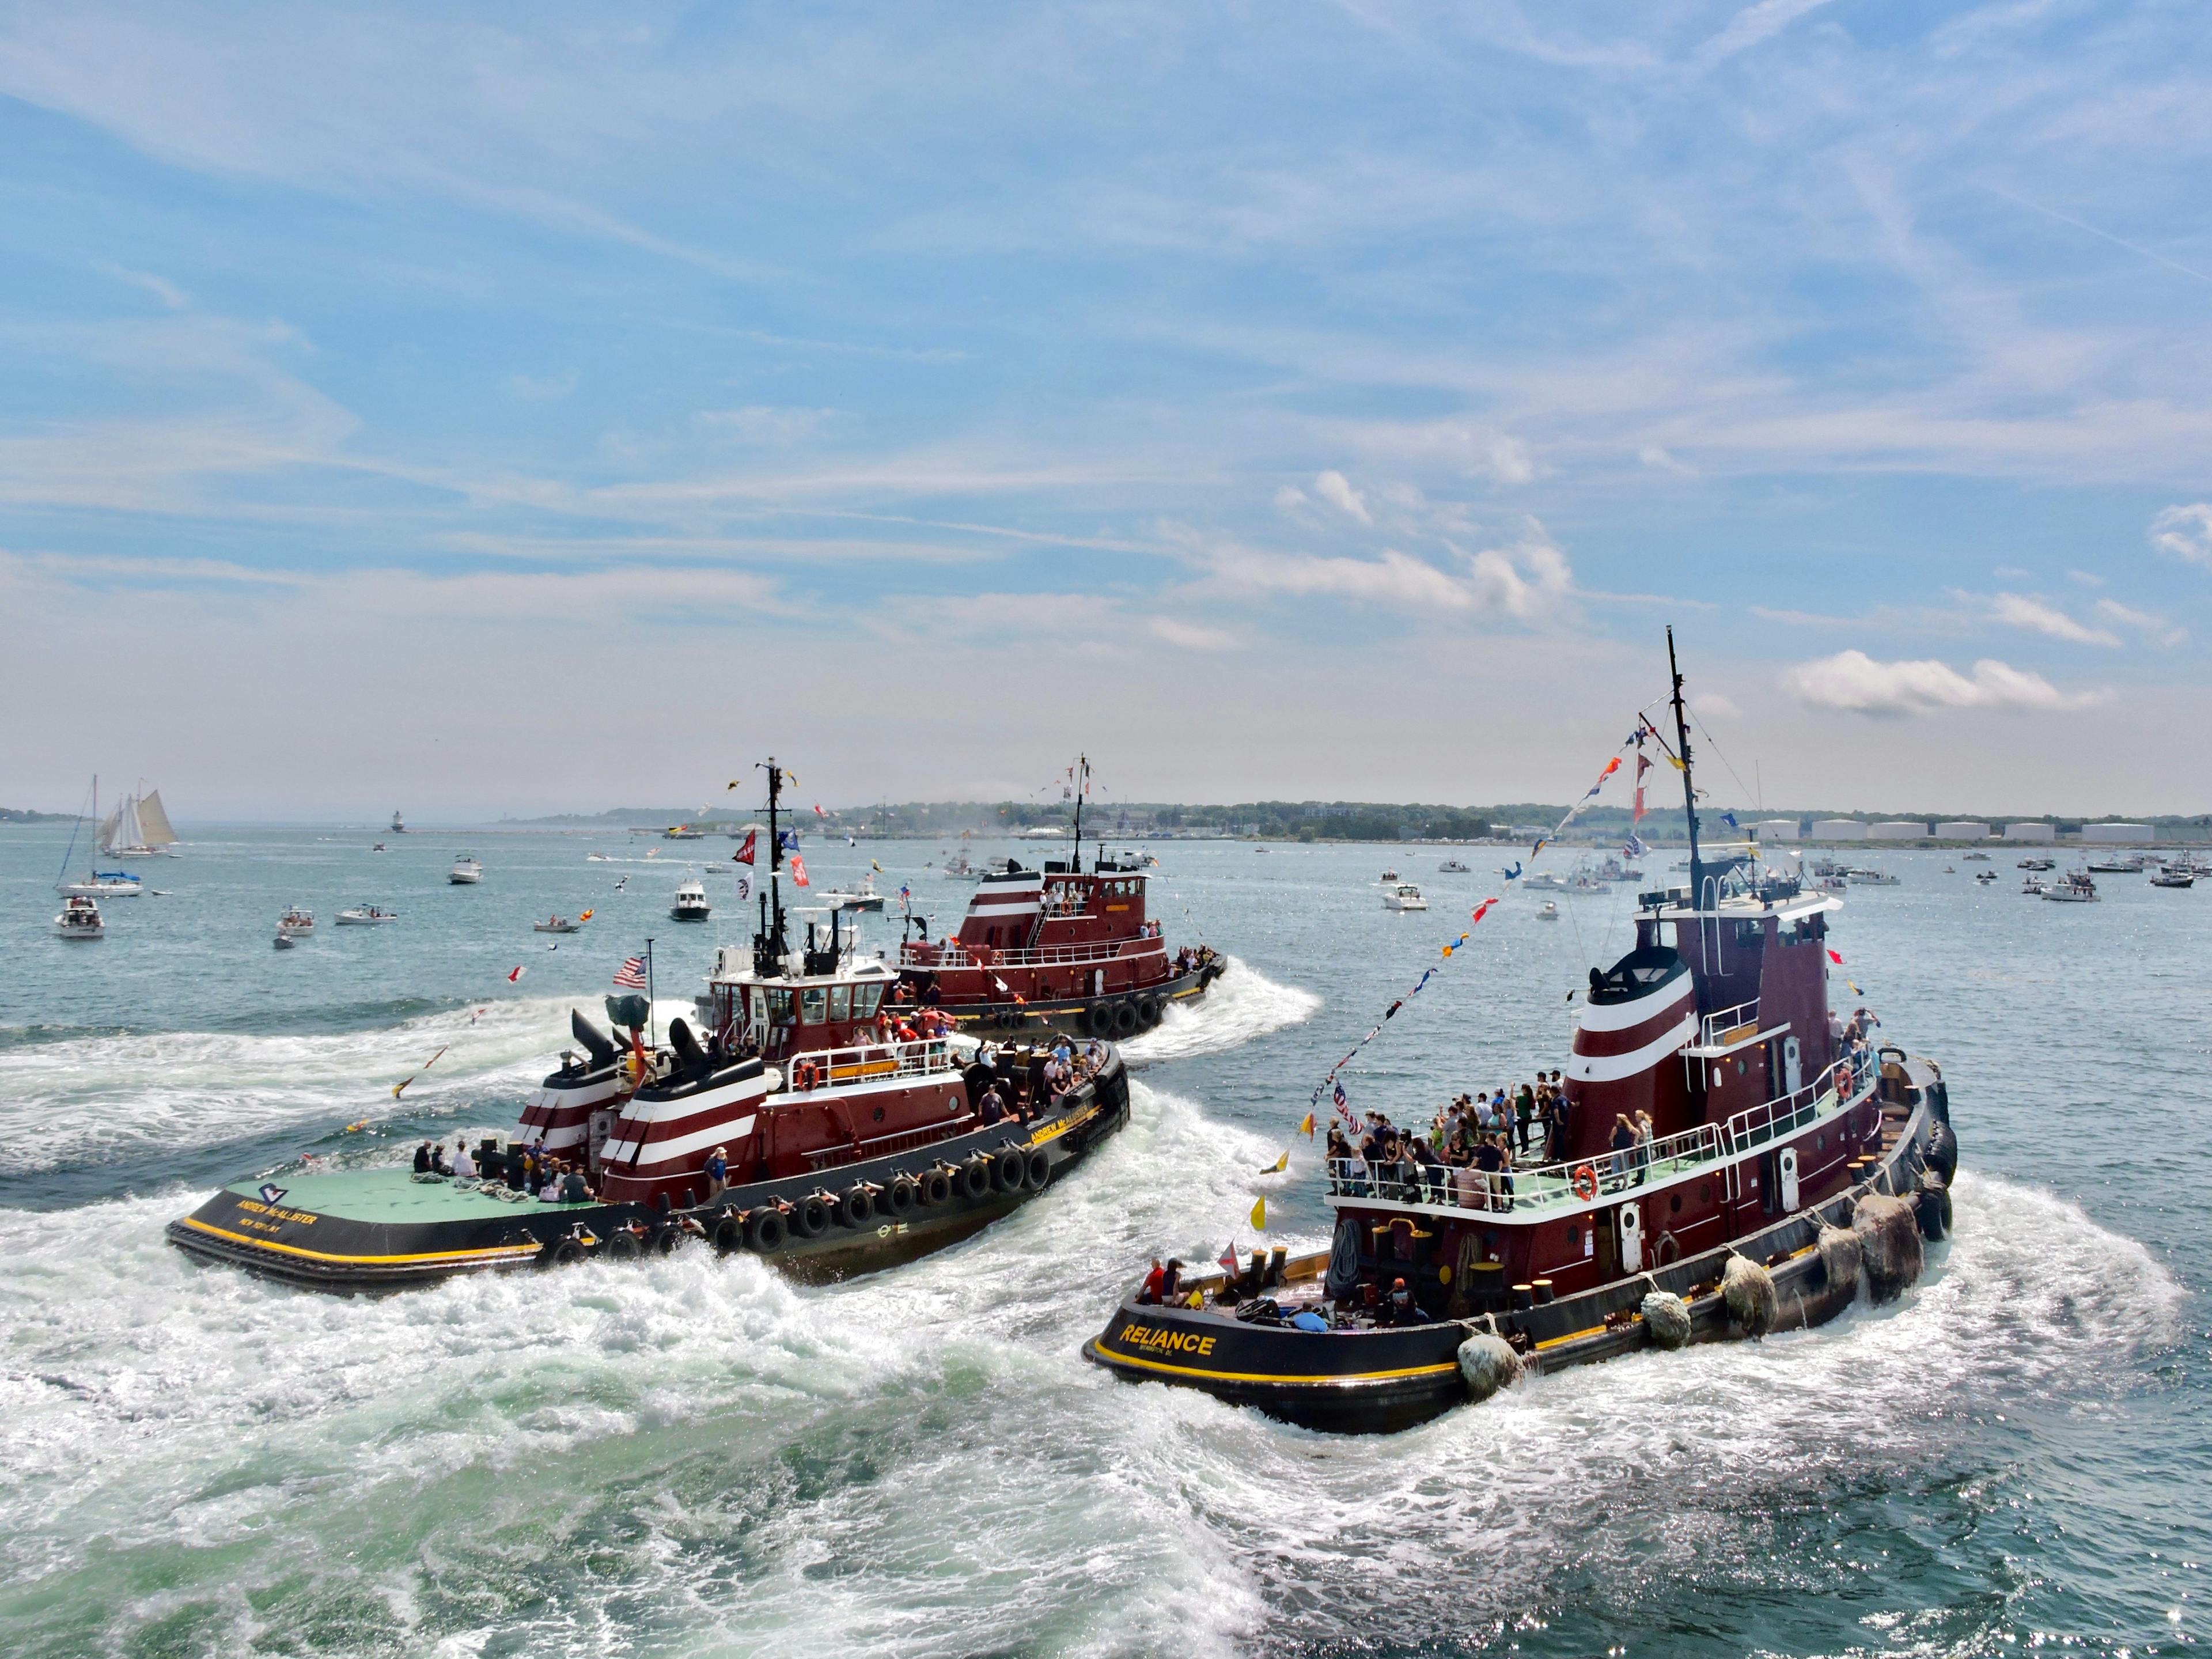 McAllister tugs participate in the annual tug races in Portland, Maine.